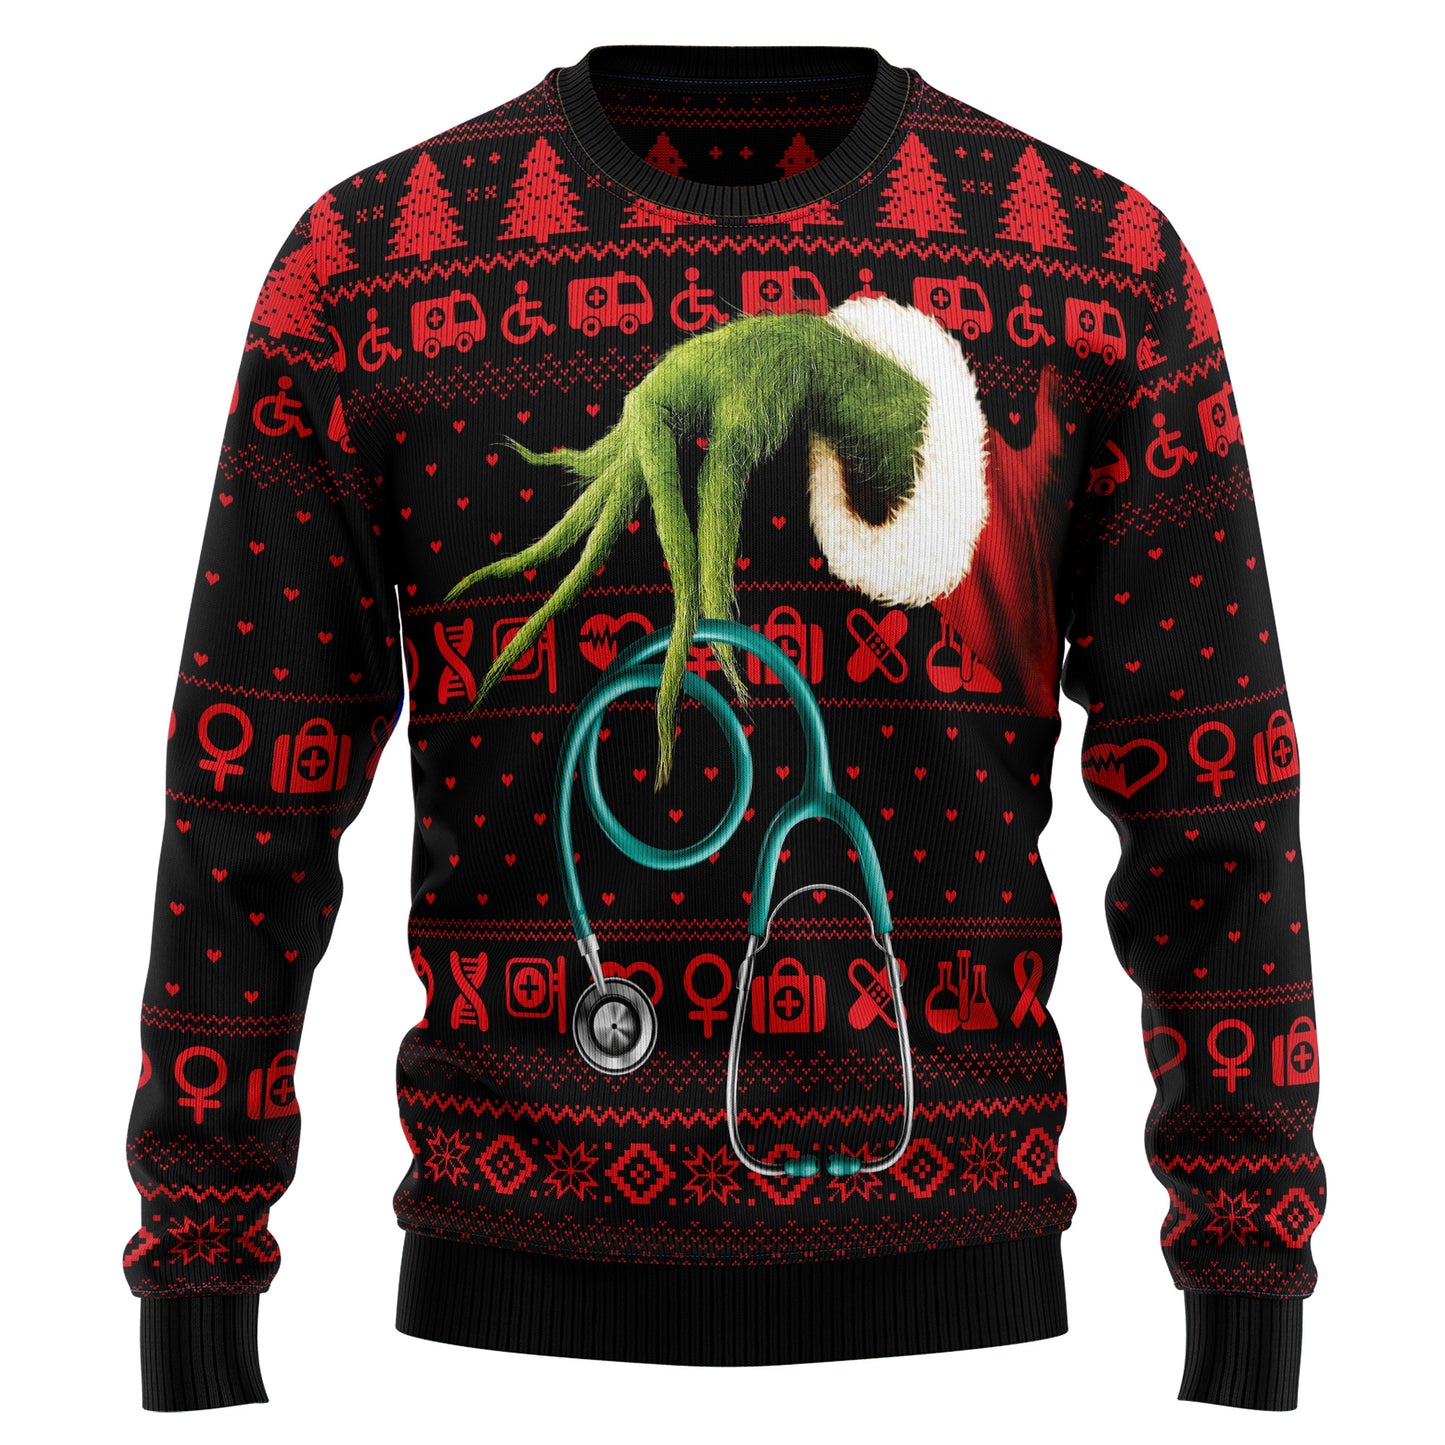 For Nurse D2610 Ugly Christmas Sweater